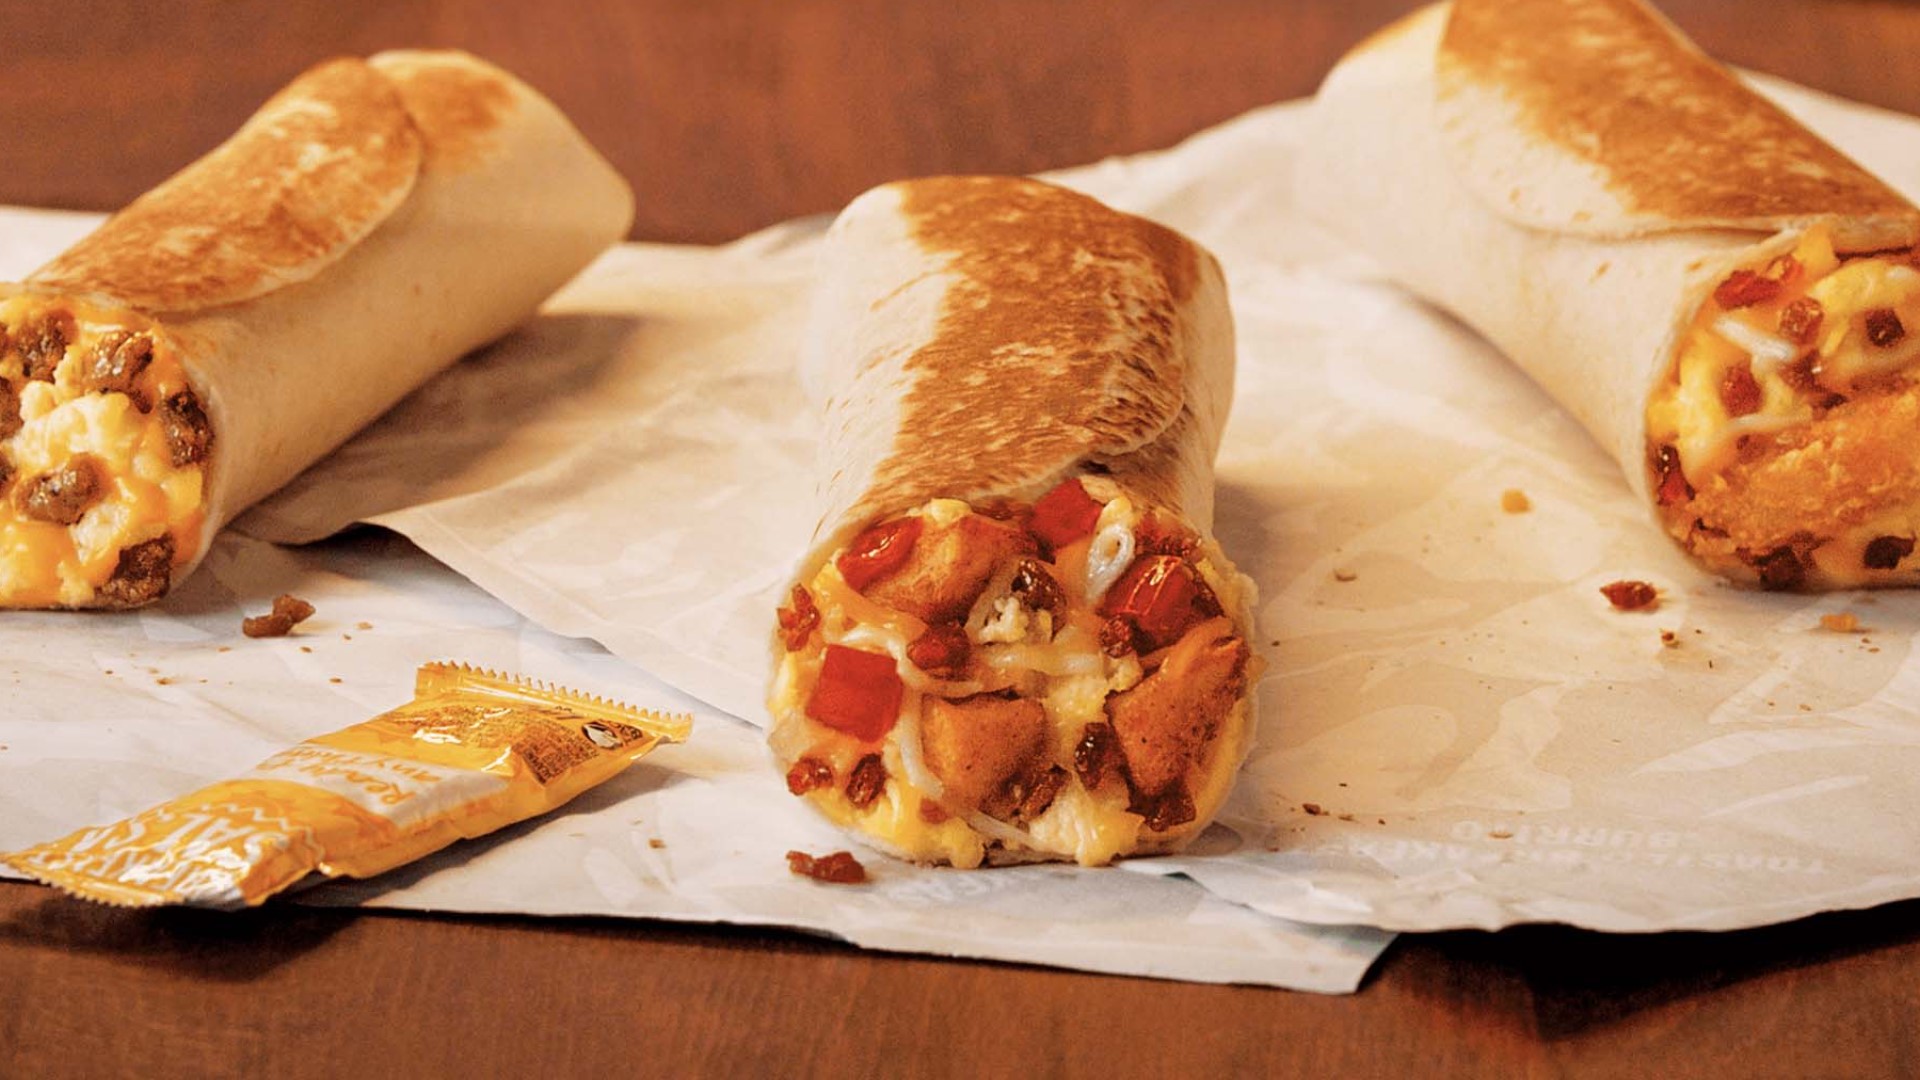 Taco Bell is offering free breakfast burritos for a limited time on Thursday, Oct. 21.